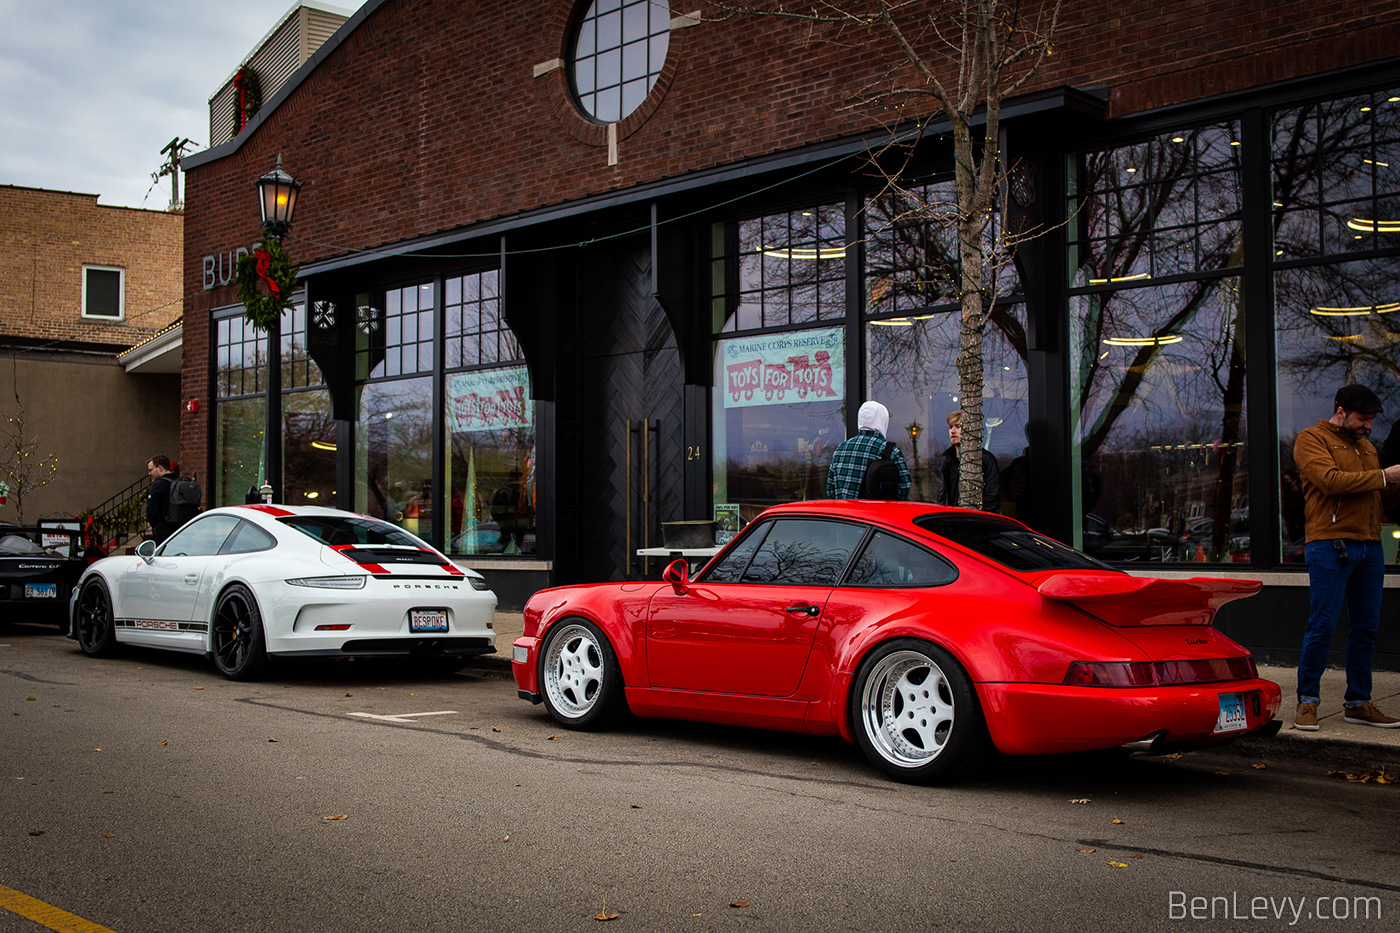 Porsche 911R and Backdated 911 Turbo at Burdi Clothing in Hinsdale